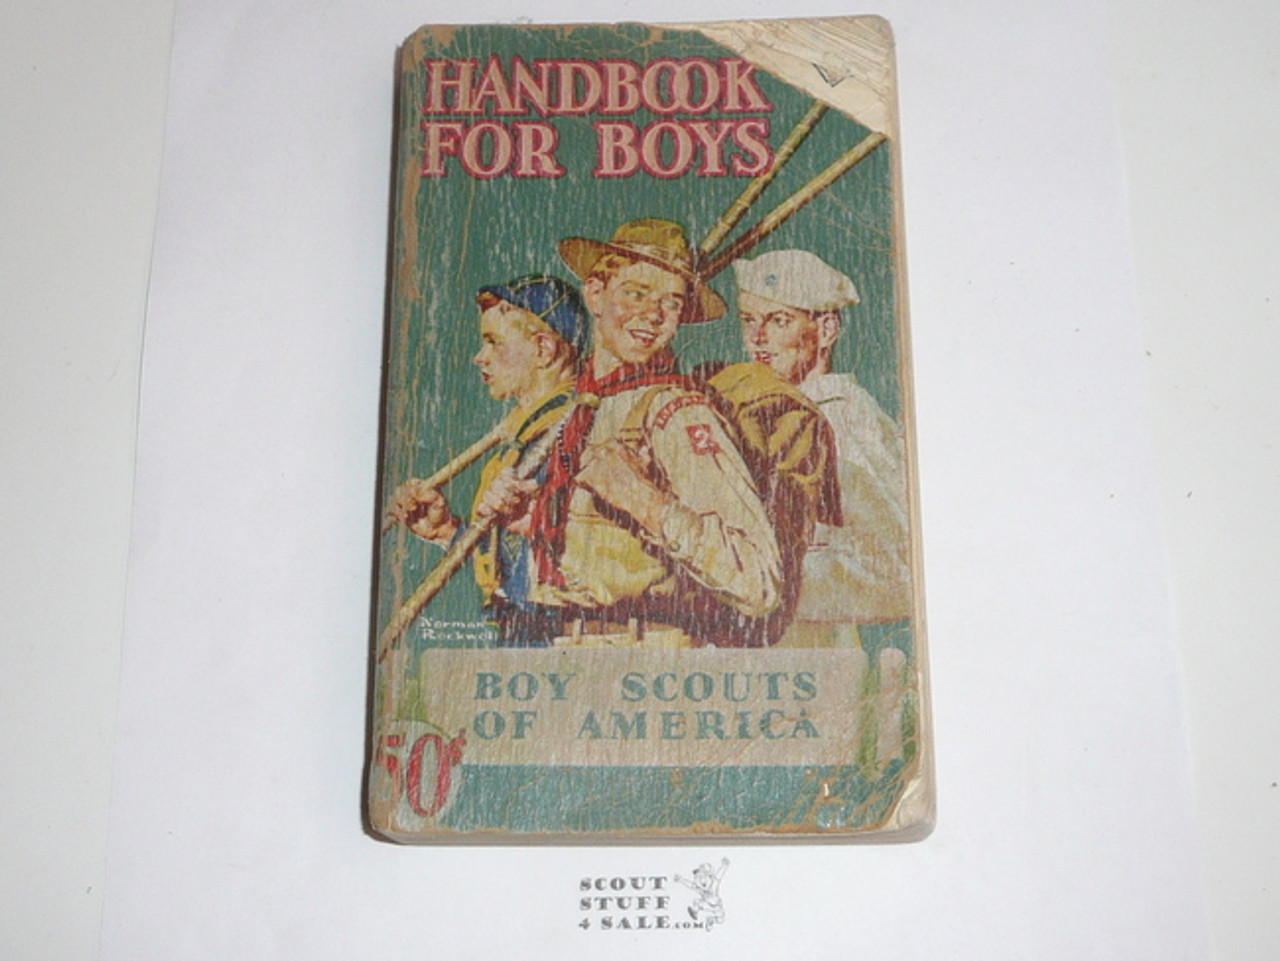 1946 Boy Scout Handbook, Fourth Edition, Thirty-ninth Printing, Norman Rockwell Cover, heavy cover spine and page wear